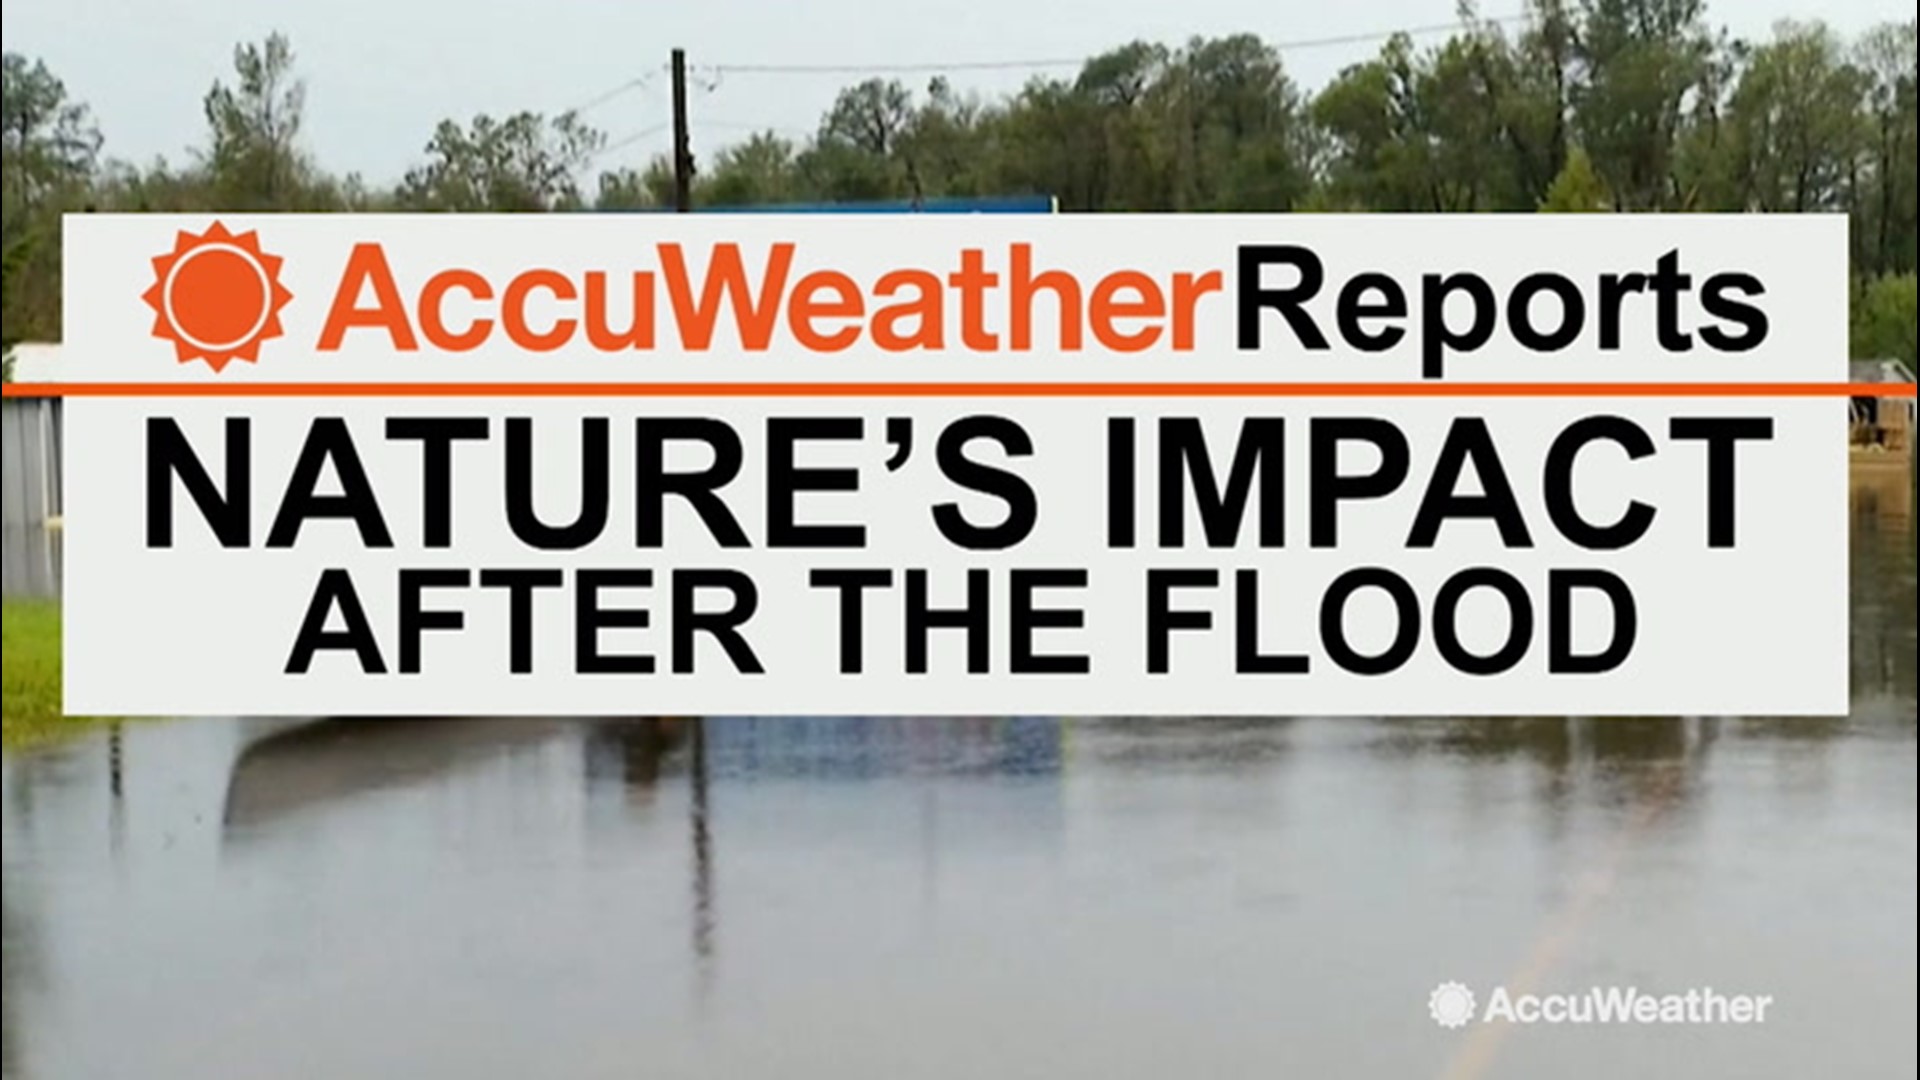 In mid-March, Nebraska was dealt a heavy blow to its agriculture industry due to flash flooding.  Bernie Rayno breaks down the total loss and impact from the flooding.